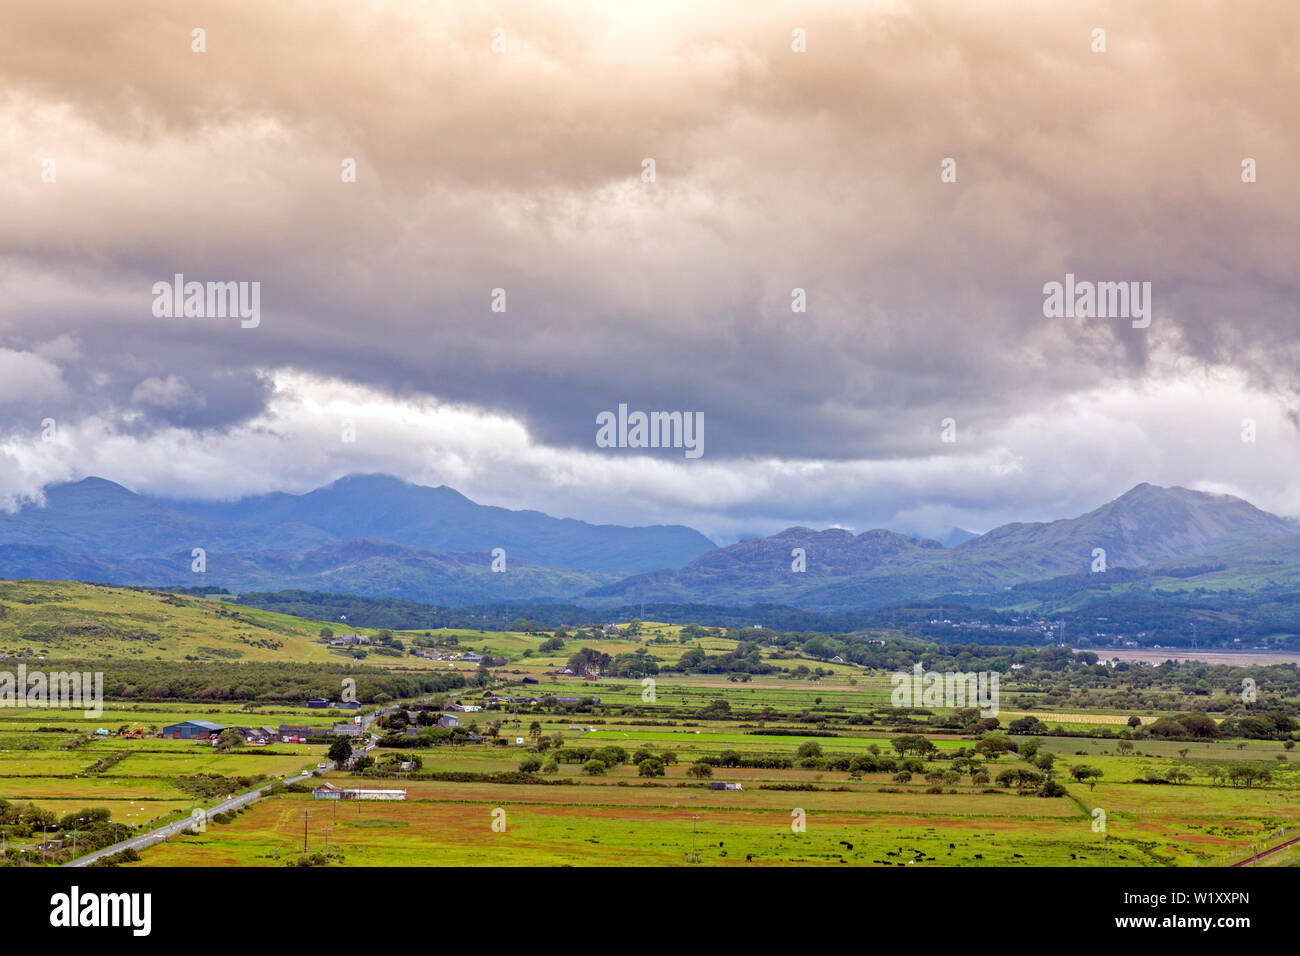 Looking north towards the mountains of Snowdonia from the top of the Castle in Harlech, Gwynedd, Wales, UK Stock Photo